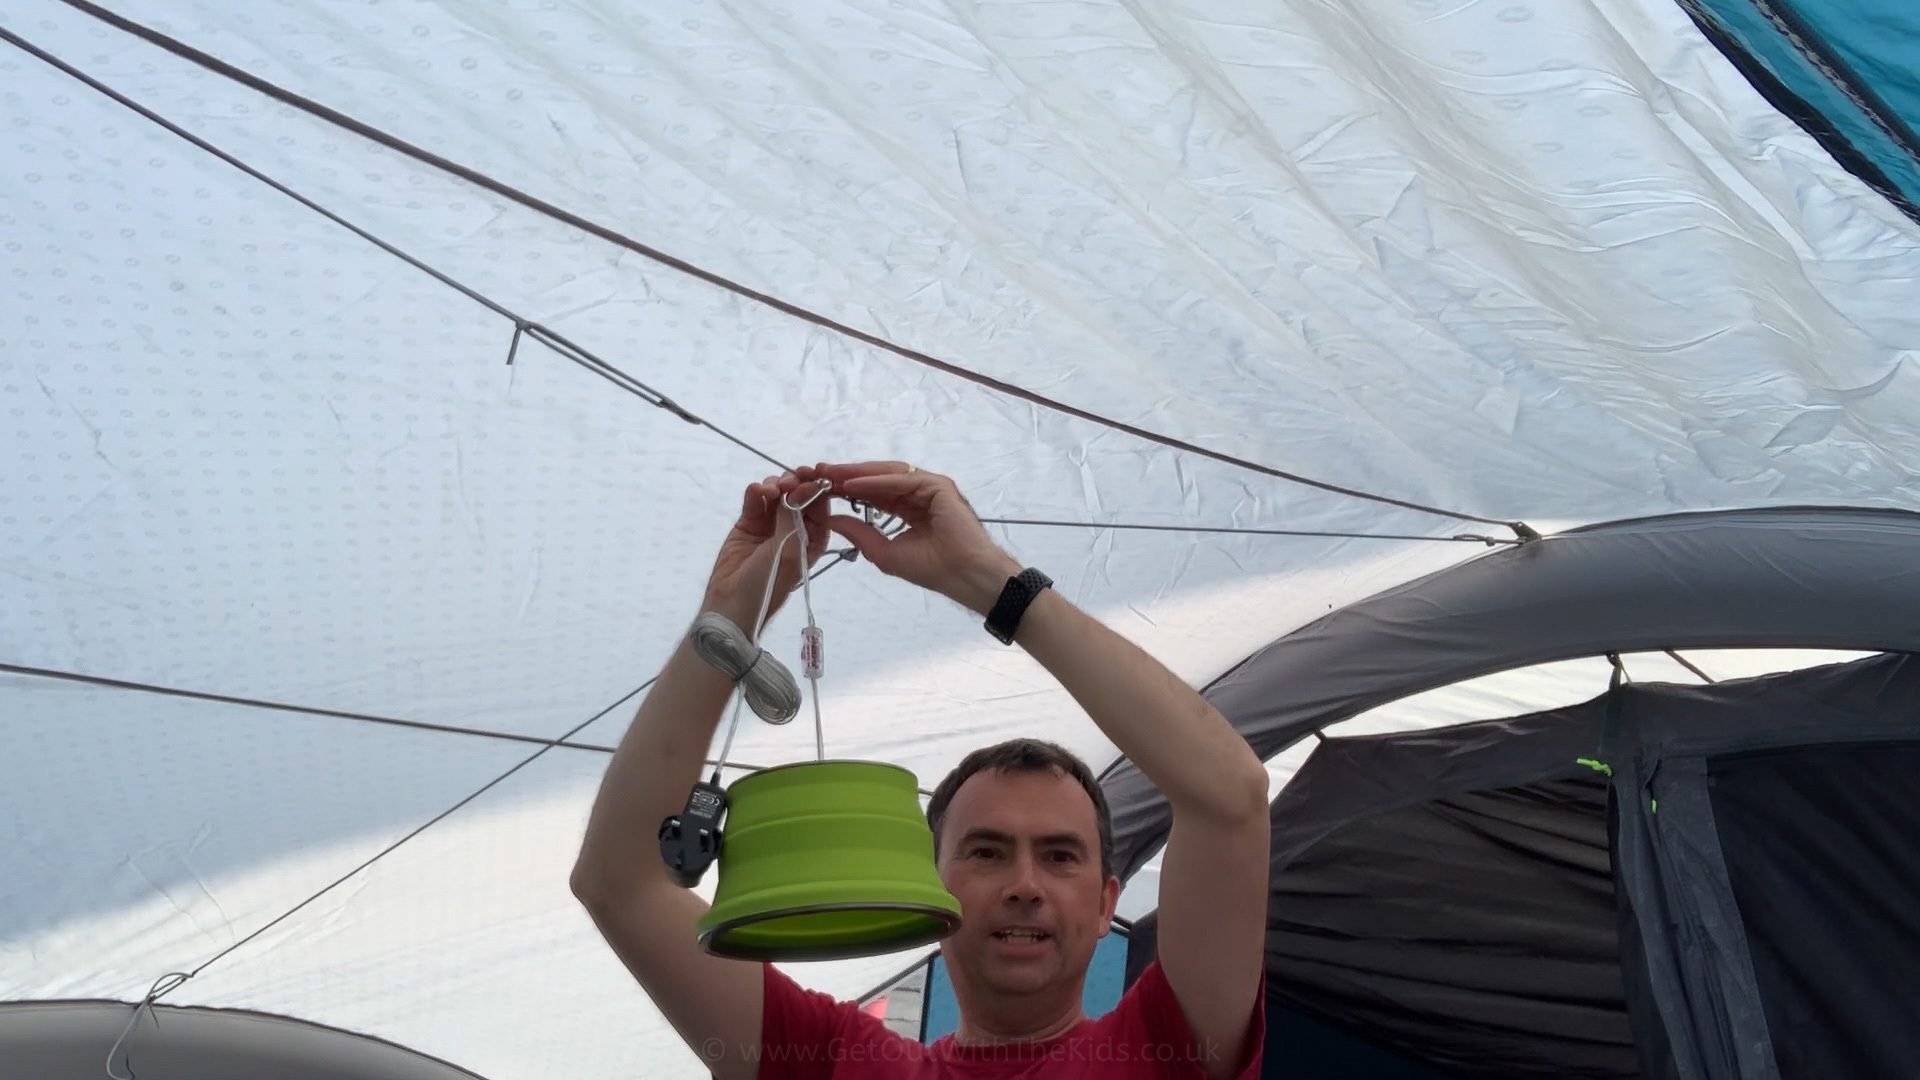 The Tent Hanging System